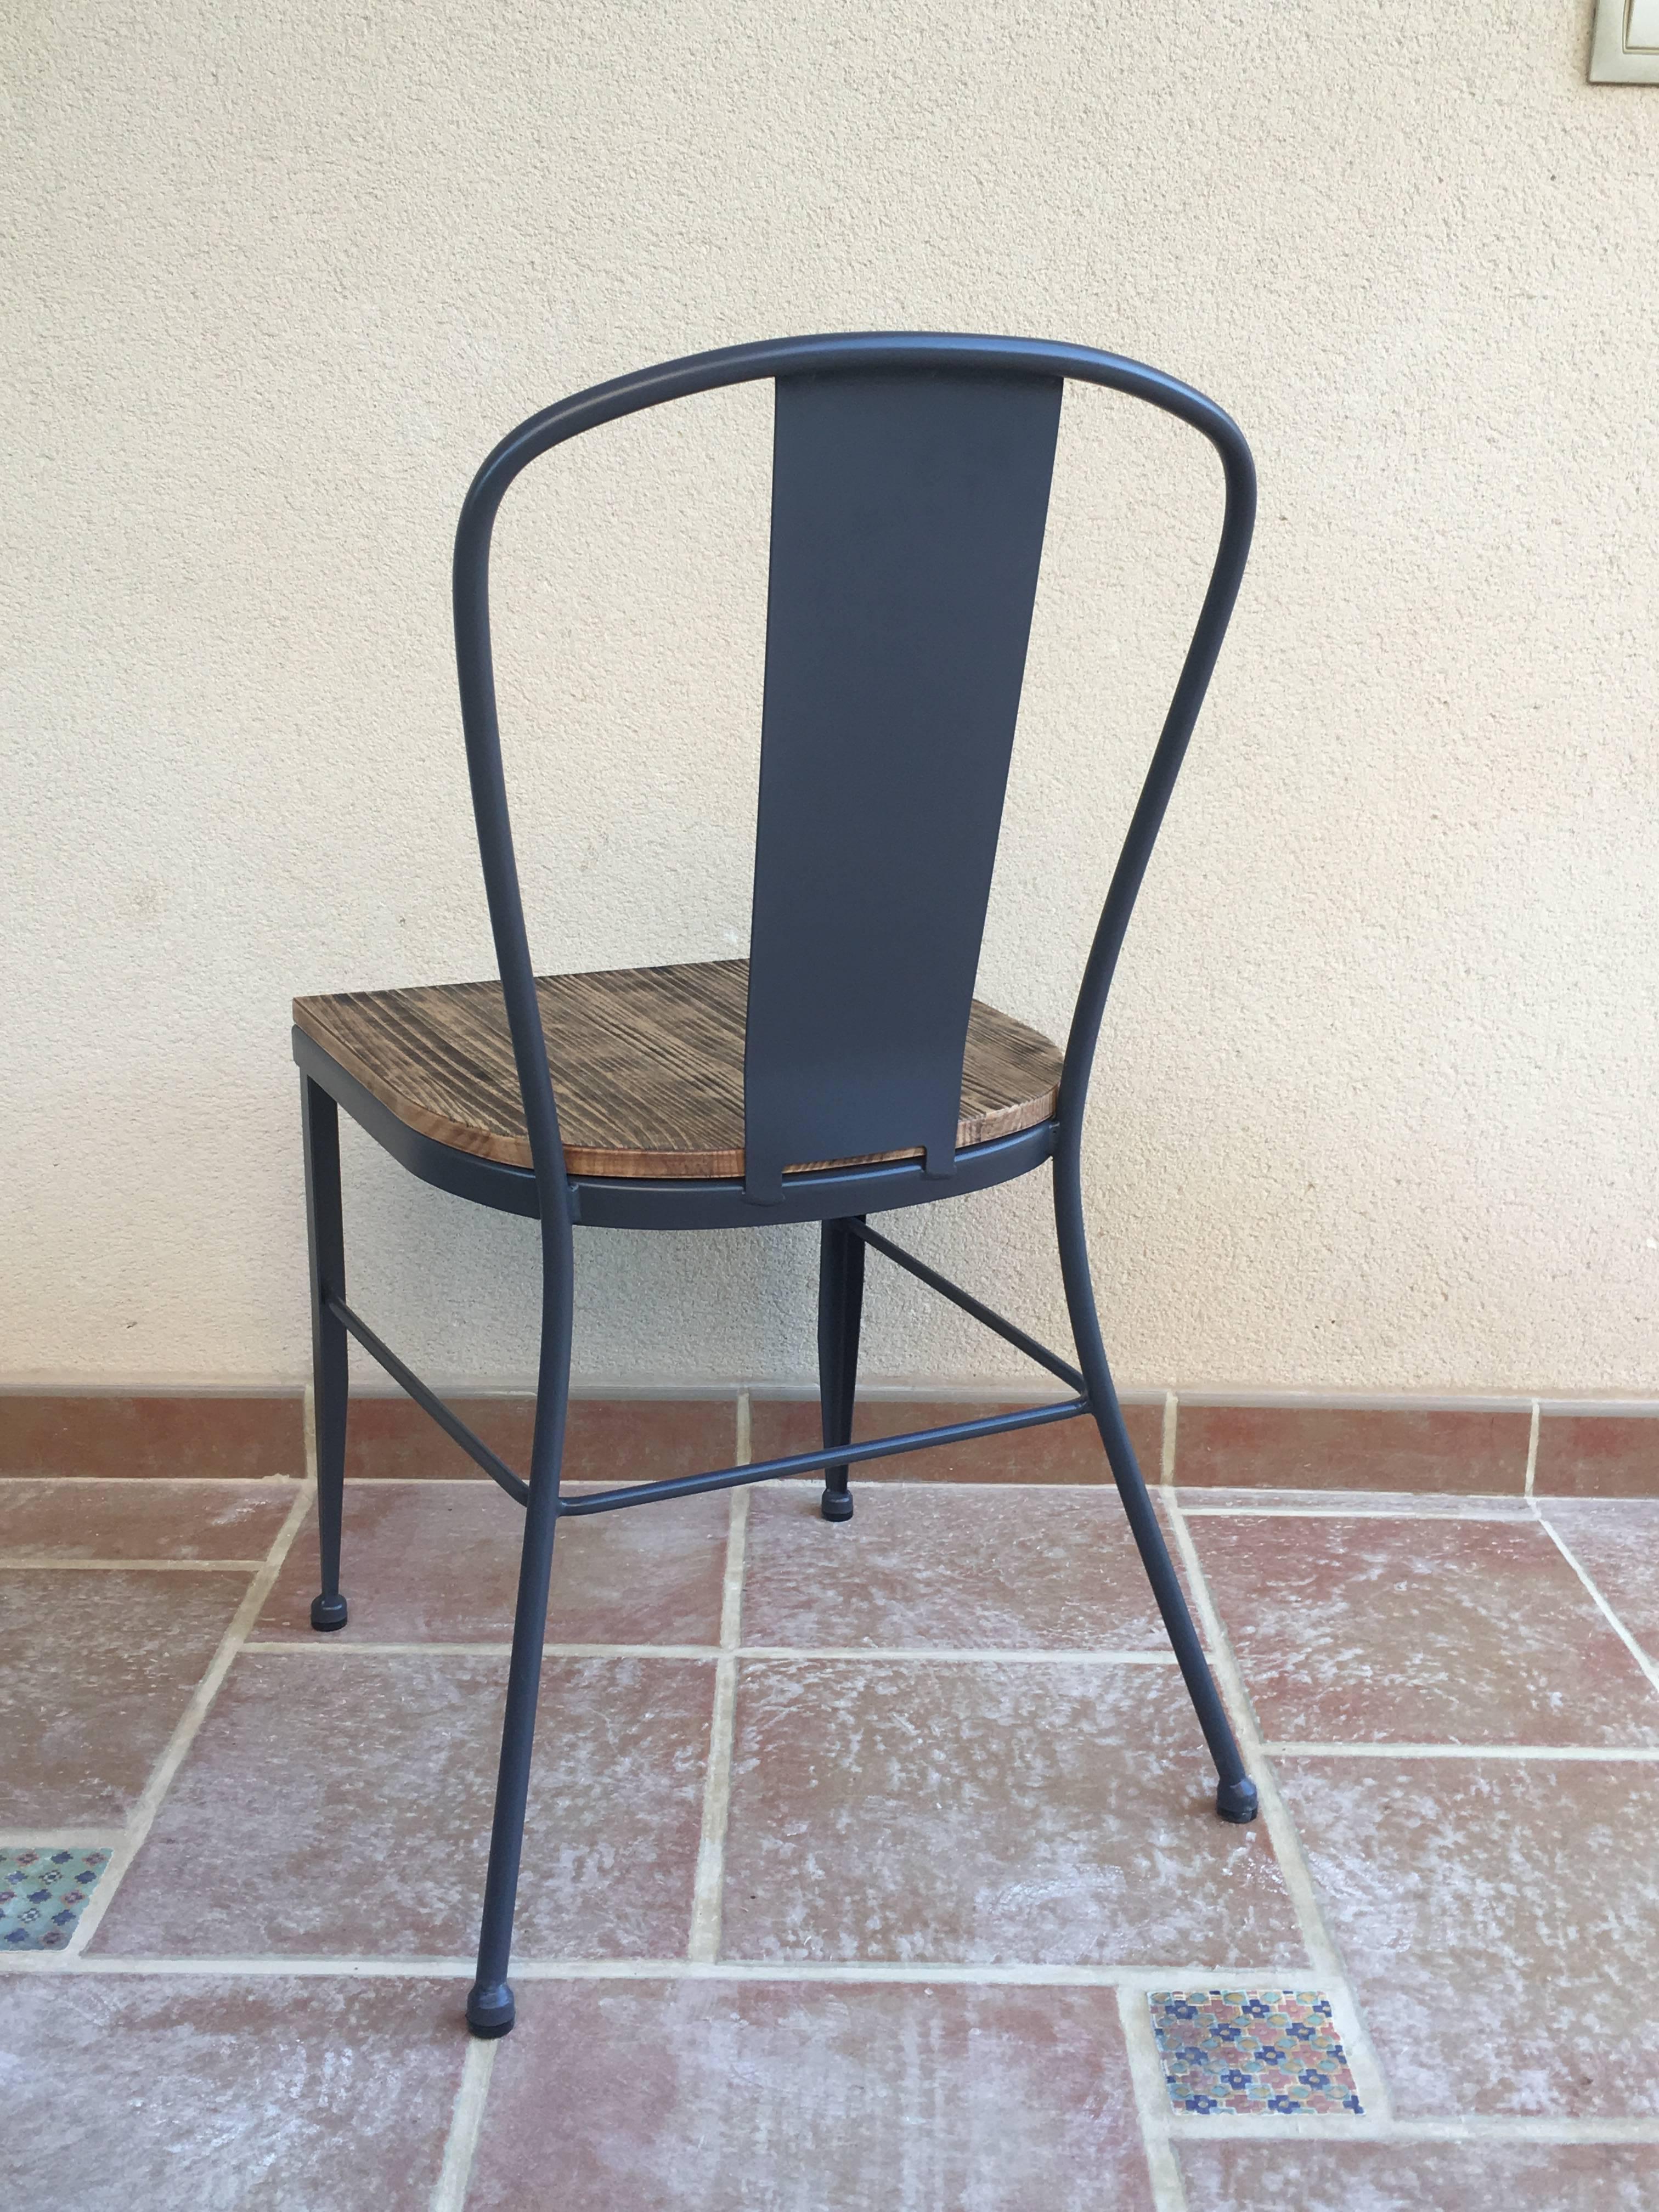 21st Century Wrought Iron Set of Patio Dining Table & Chairs. Indoor & Outdoor For Sale 2